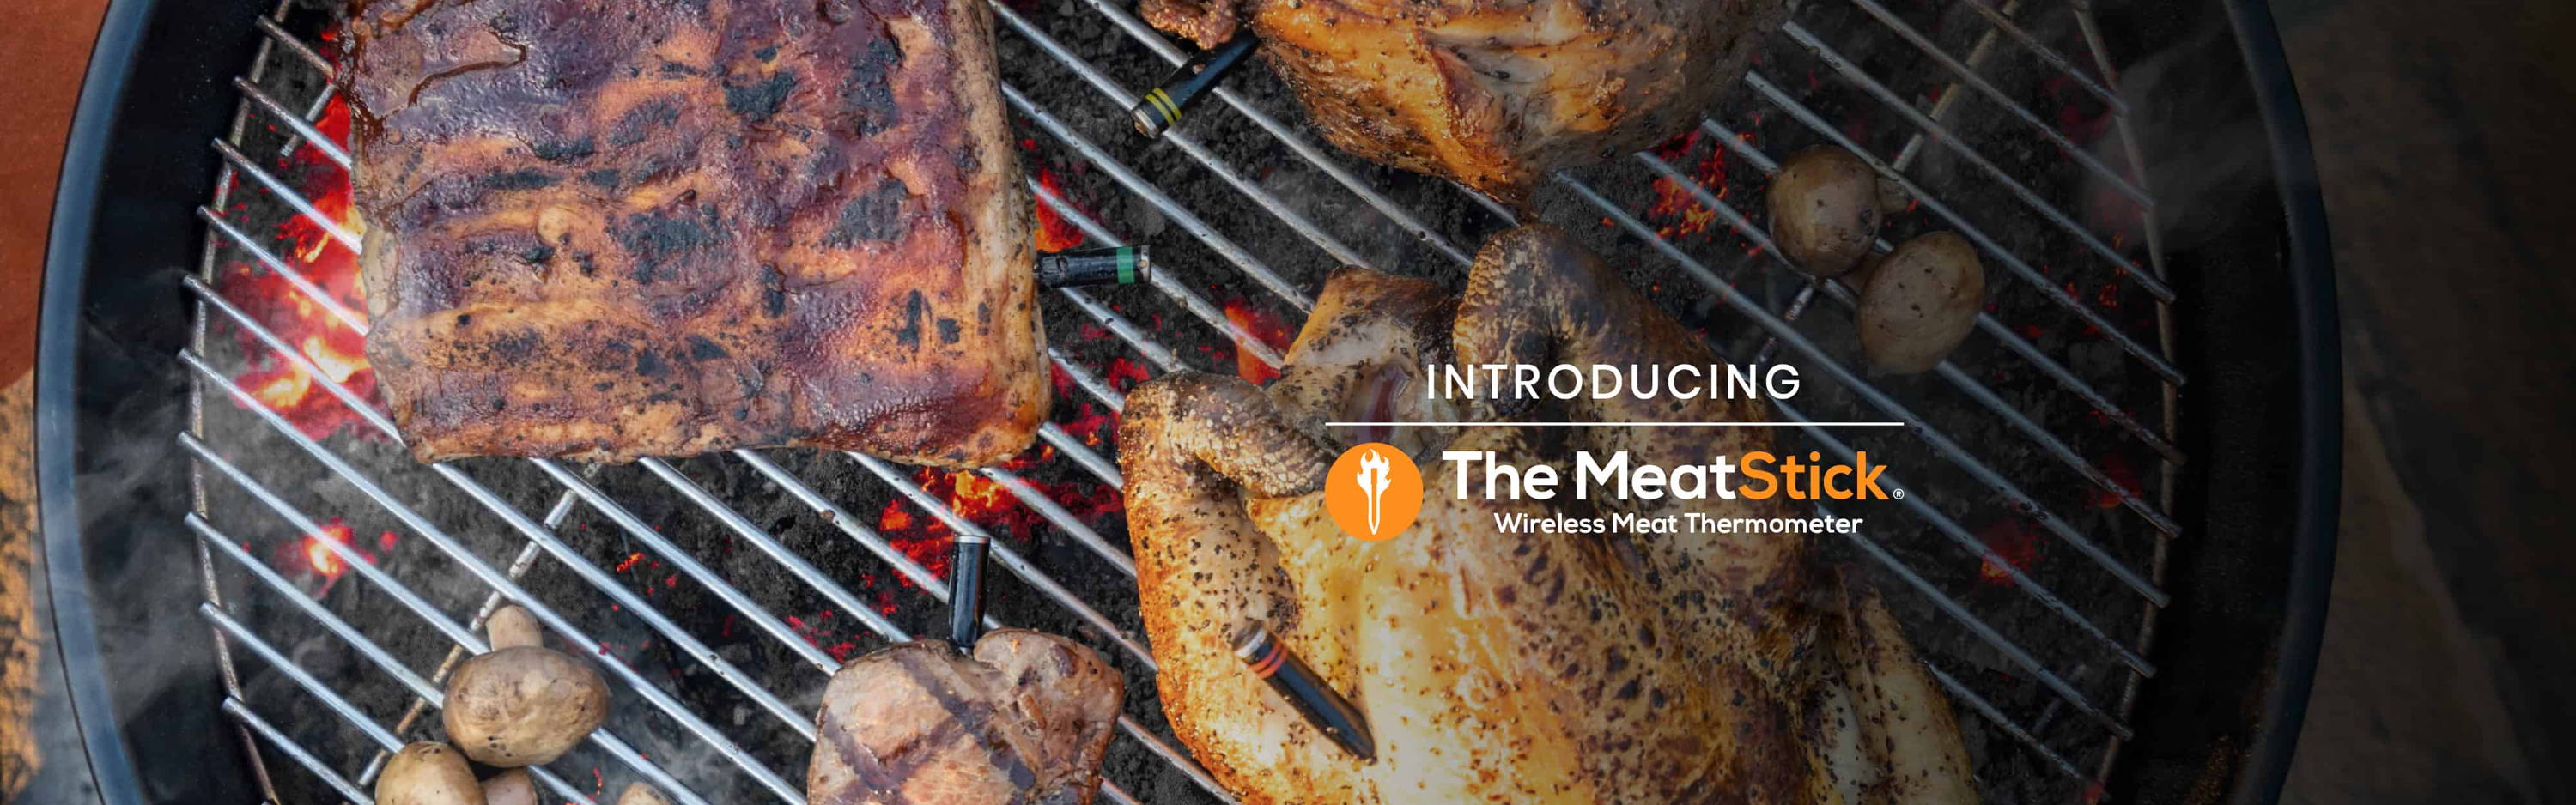 Introducing The MeatStick Wireless Meat Thermometer